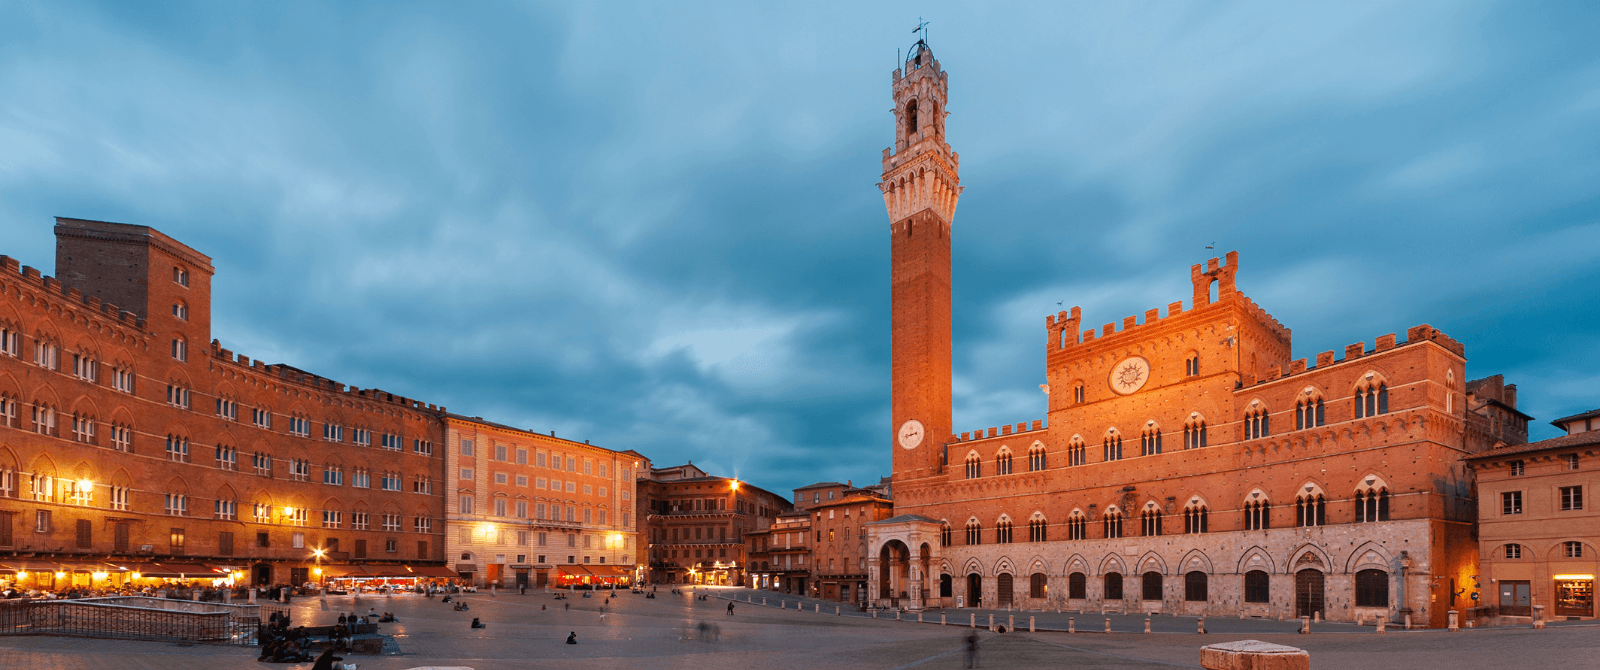 Explore the medieval town of Siena